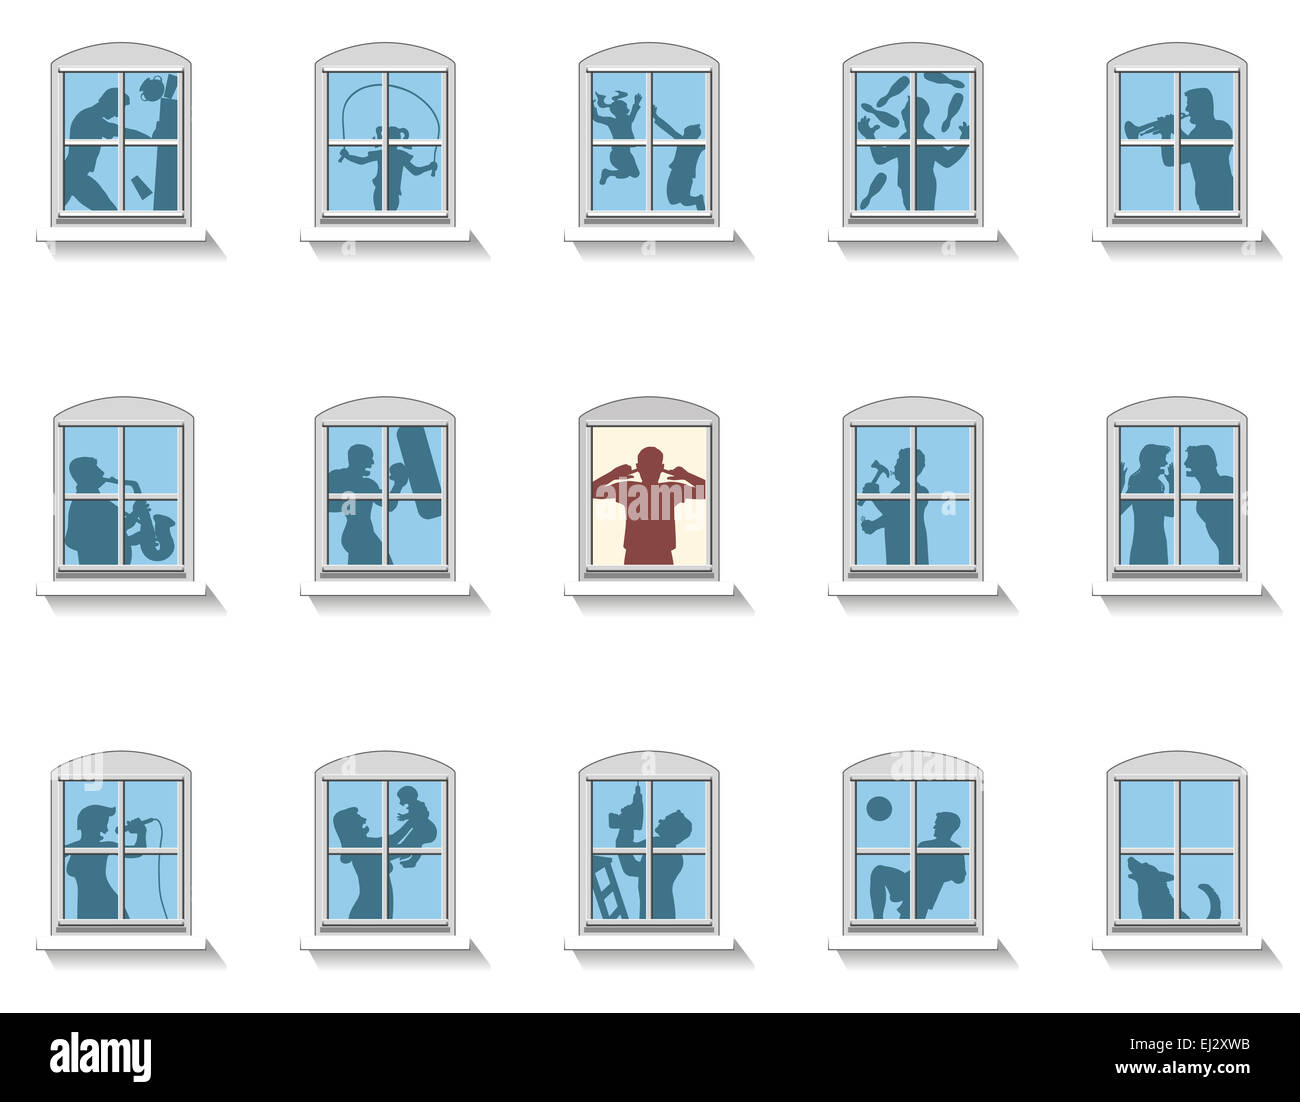 Neighbors that make various kinds of noise, in the middle window an annoyed man covers his ears Stock Photo